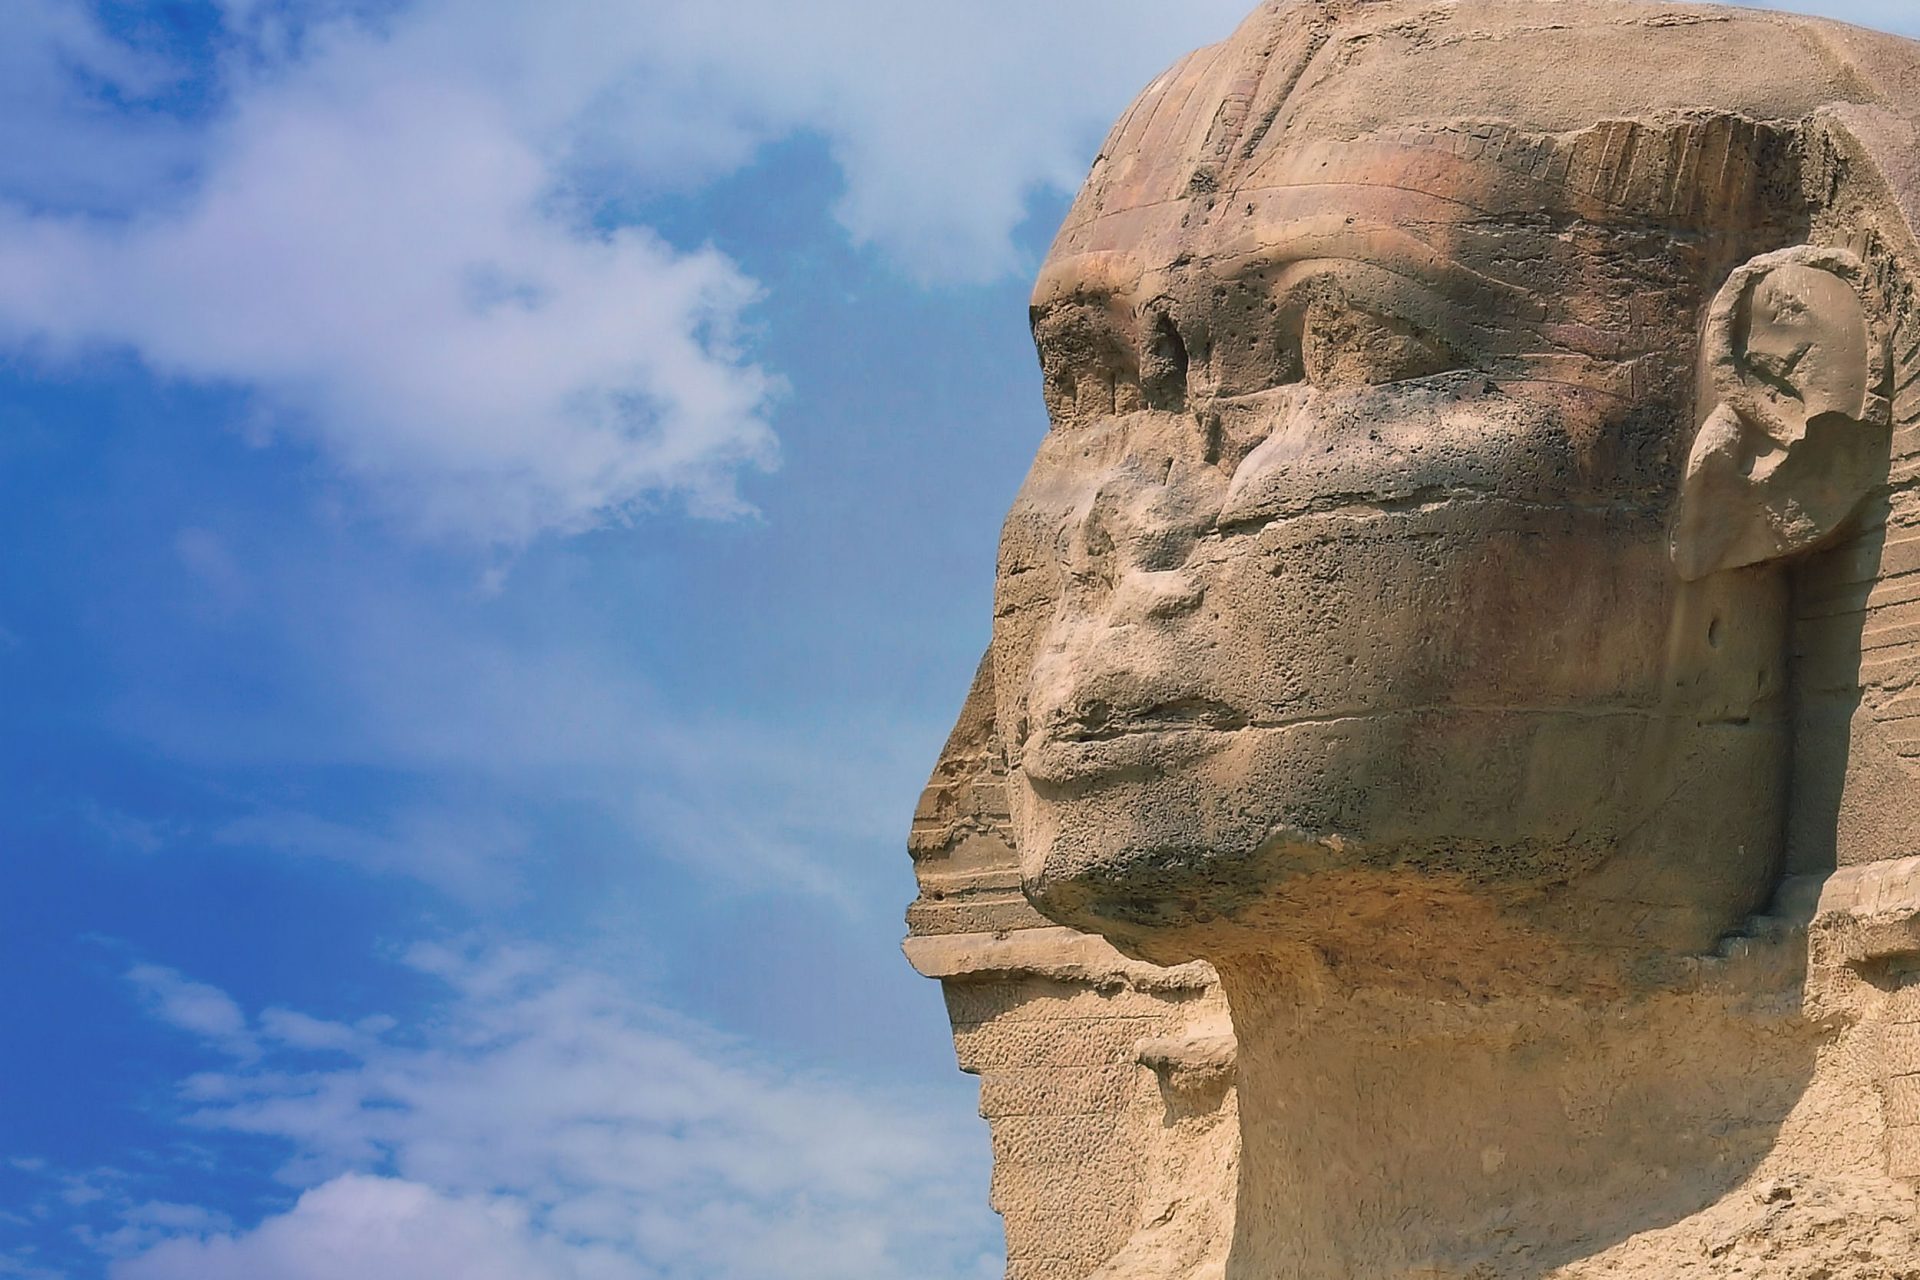 3. The Great Sphinx of Giza in Egypt 